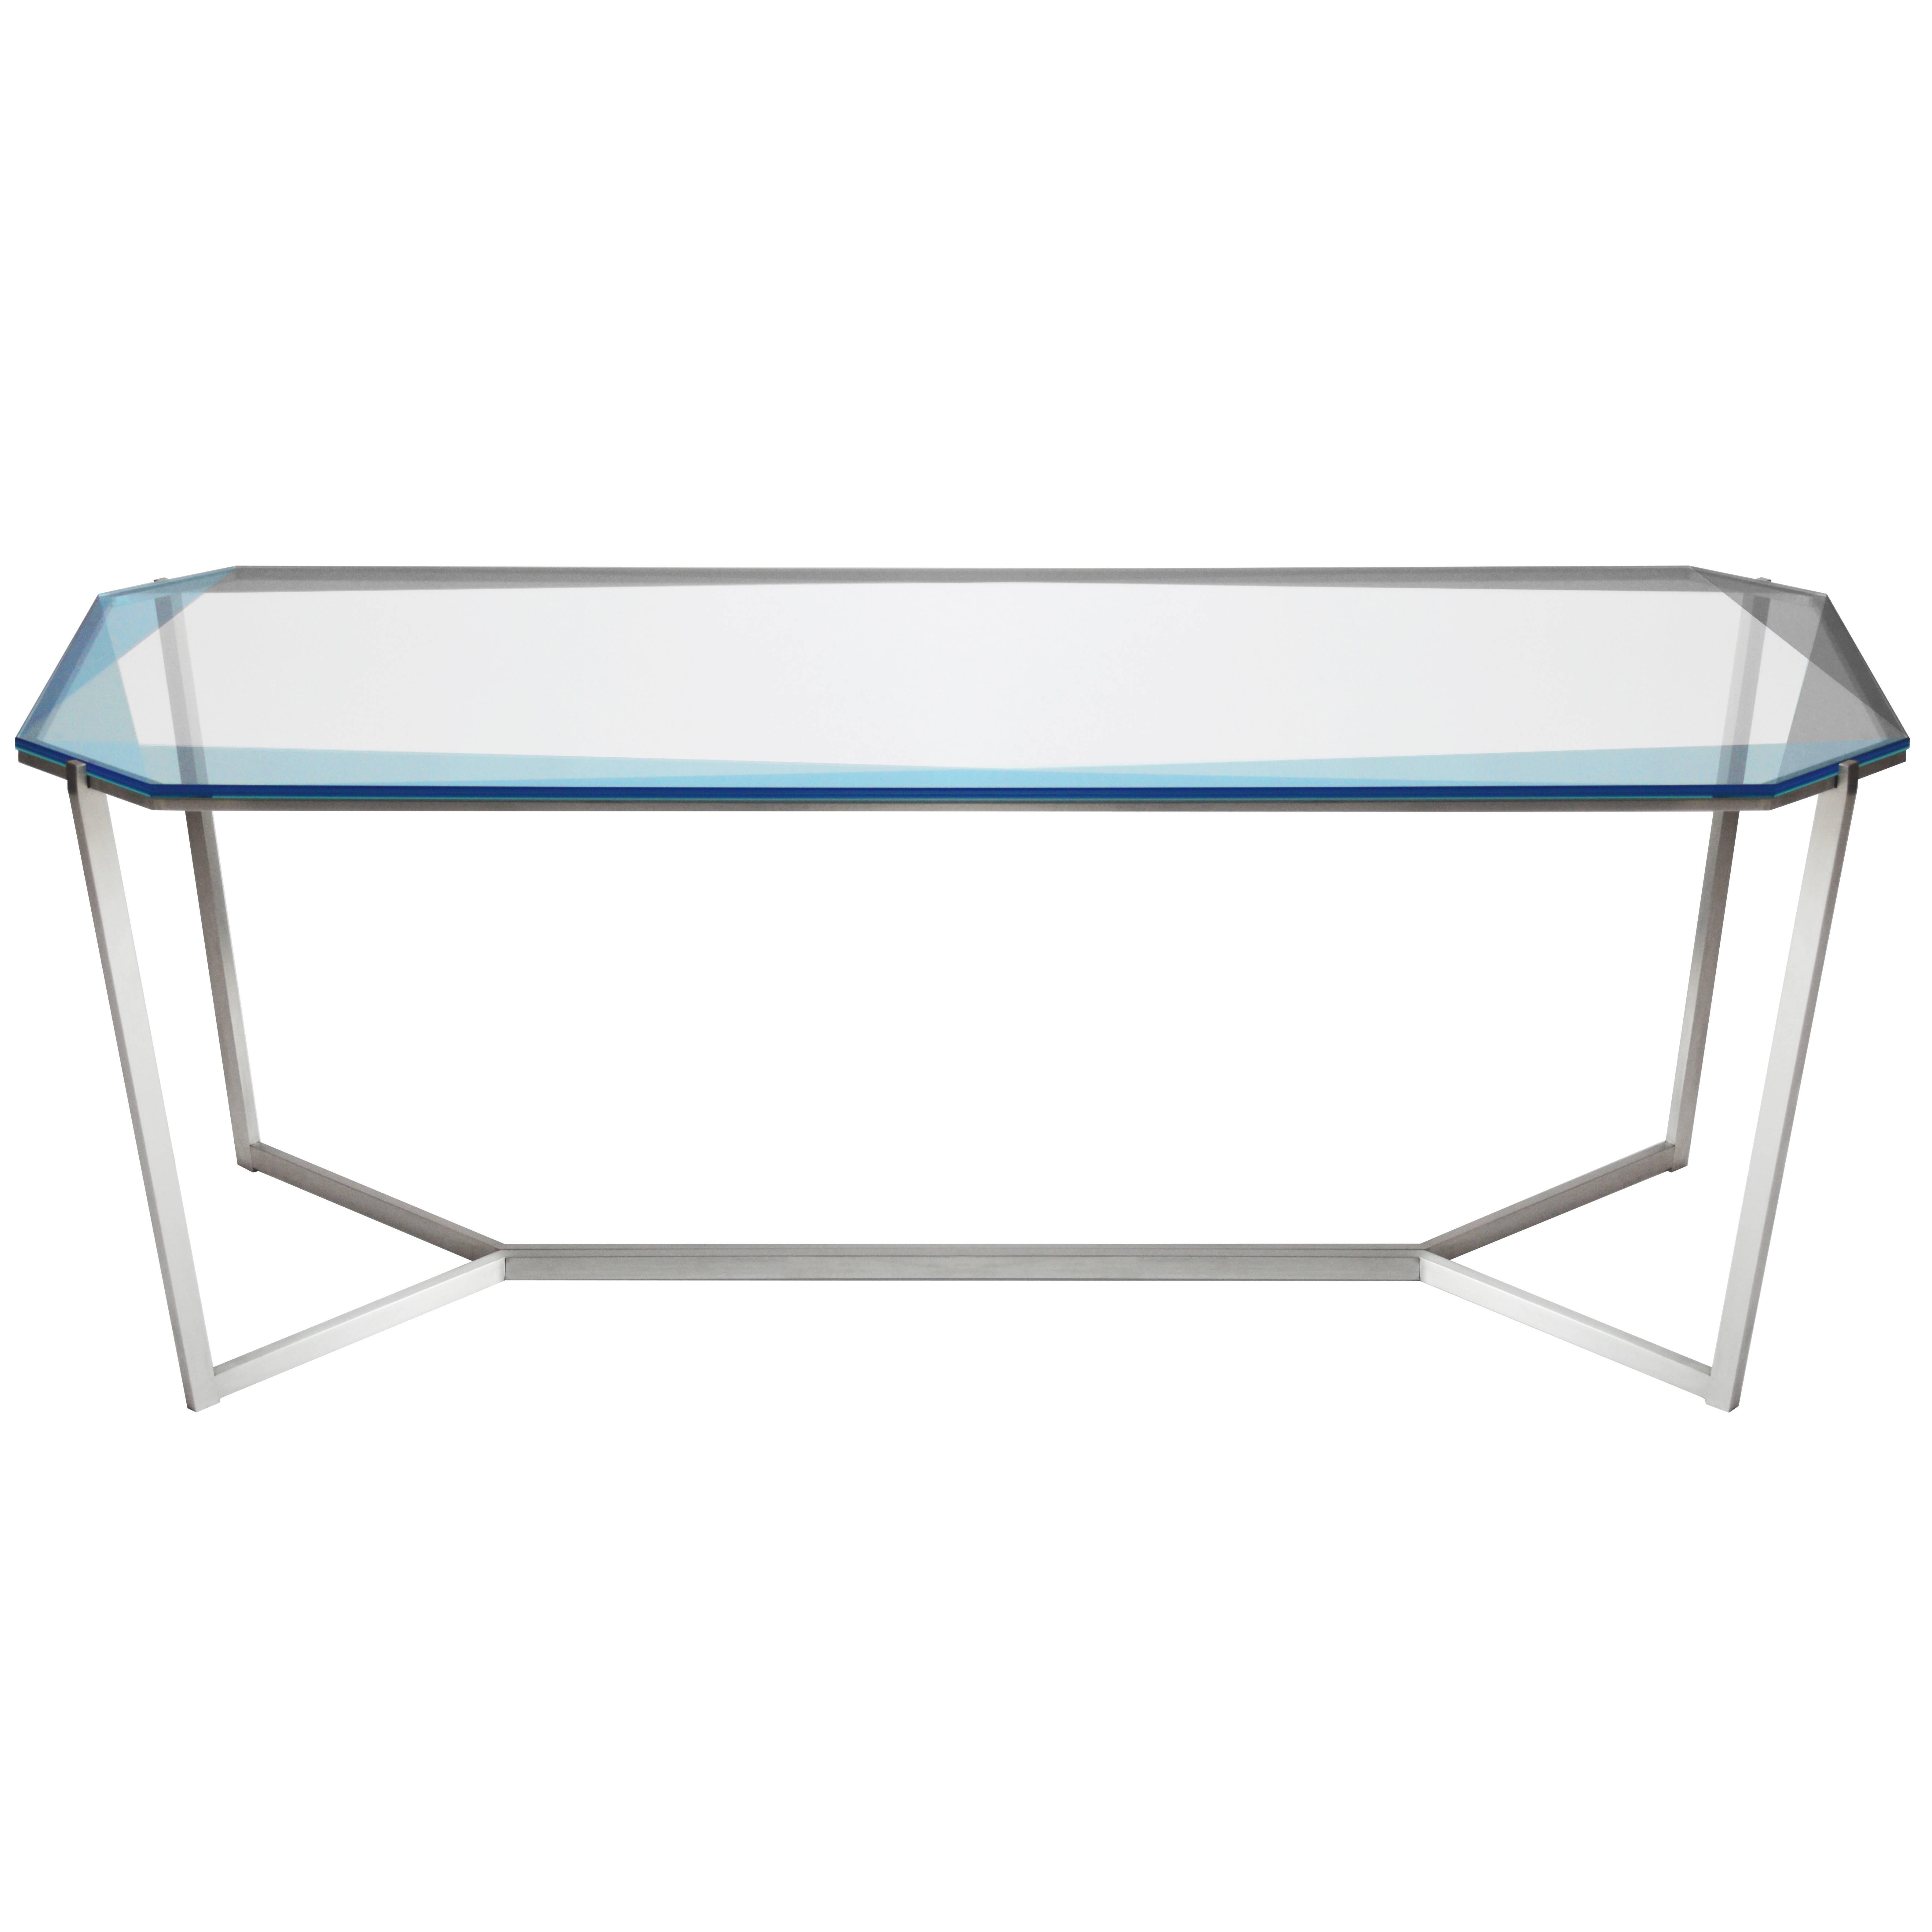 Gem Rectangular Dining Table/ Blue Glass with Stainless Steel Base by Debra Folz For Sale